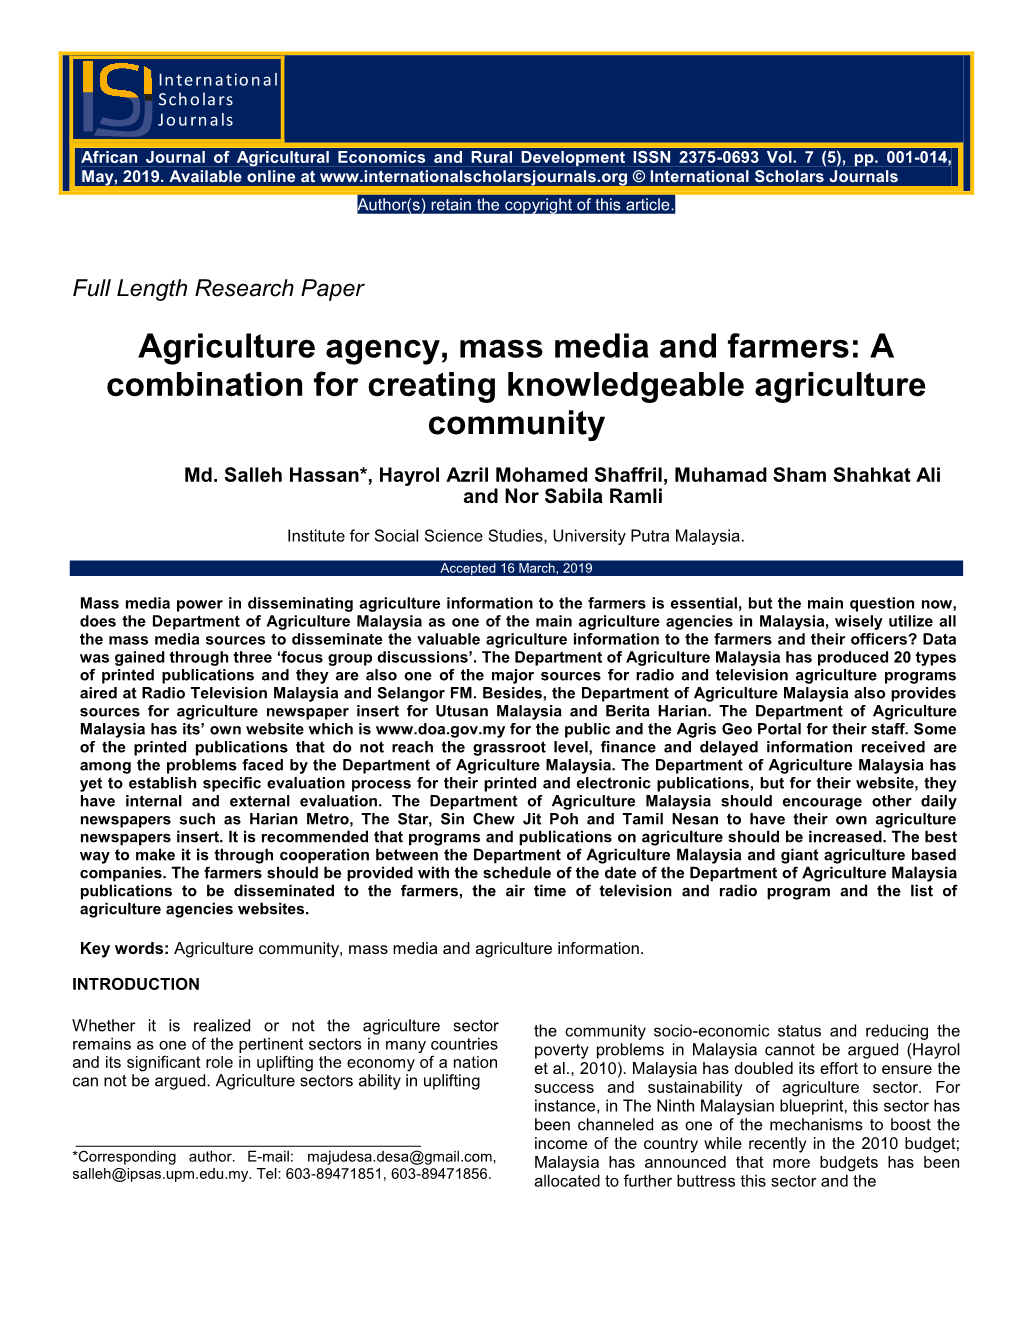 Agriculture Agency, Mass Media and Farmers: a Combination for Creating Knowledgeable Agriculture Community